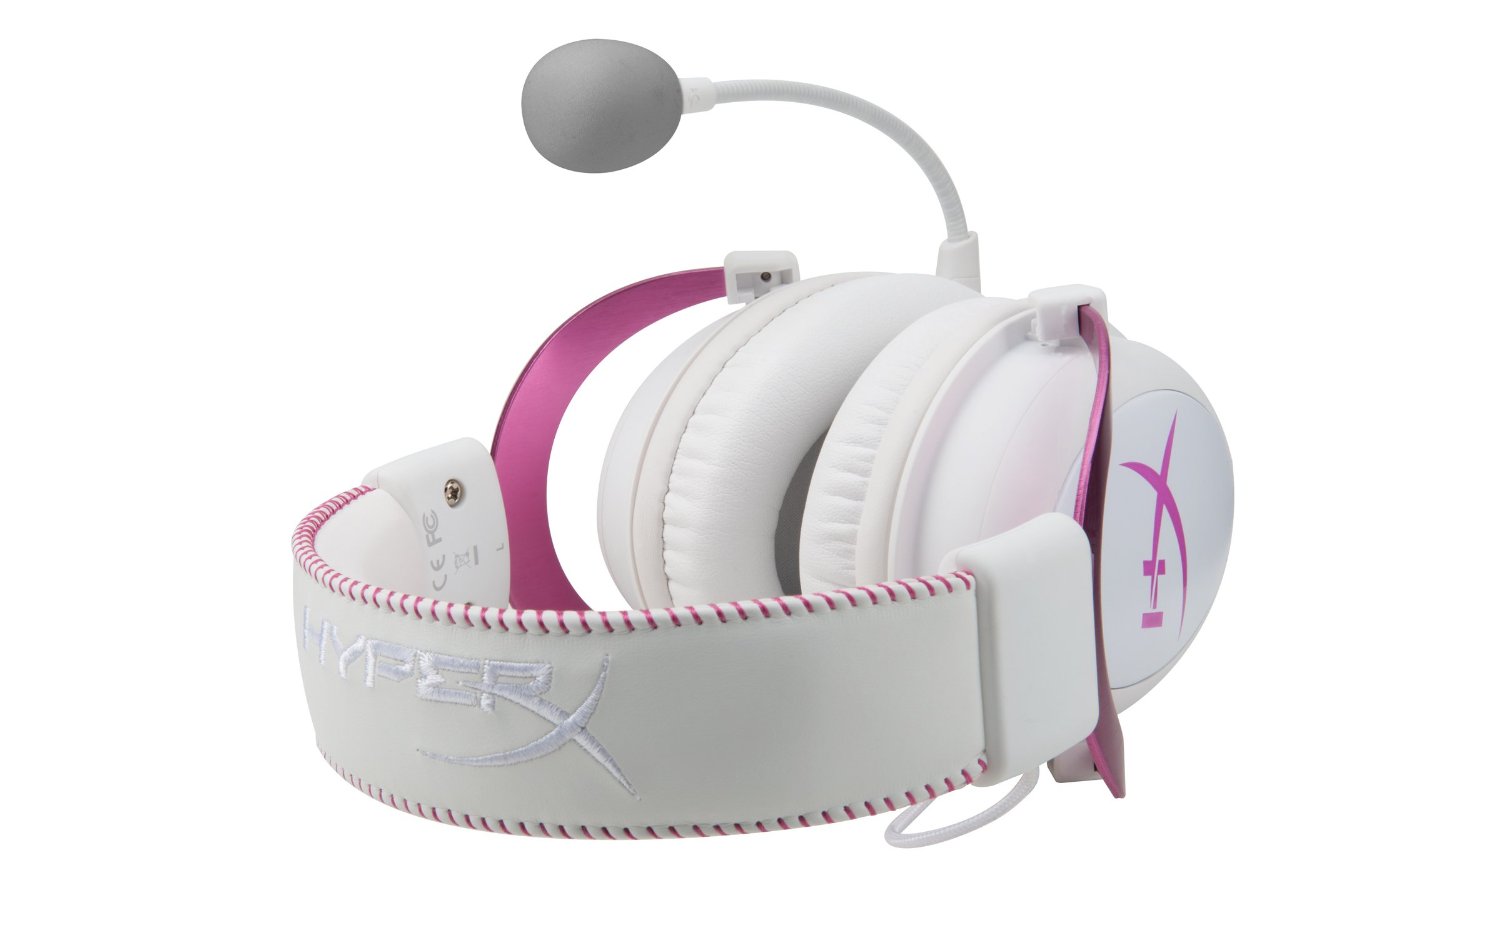 A Look At The Pink Hyperx Cloud Ii Gaming Headset For Pc Ps4 And Xbox One Game Idealist